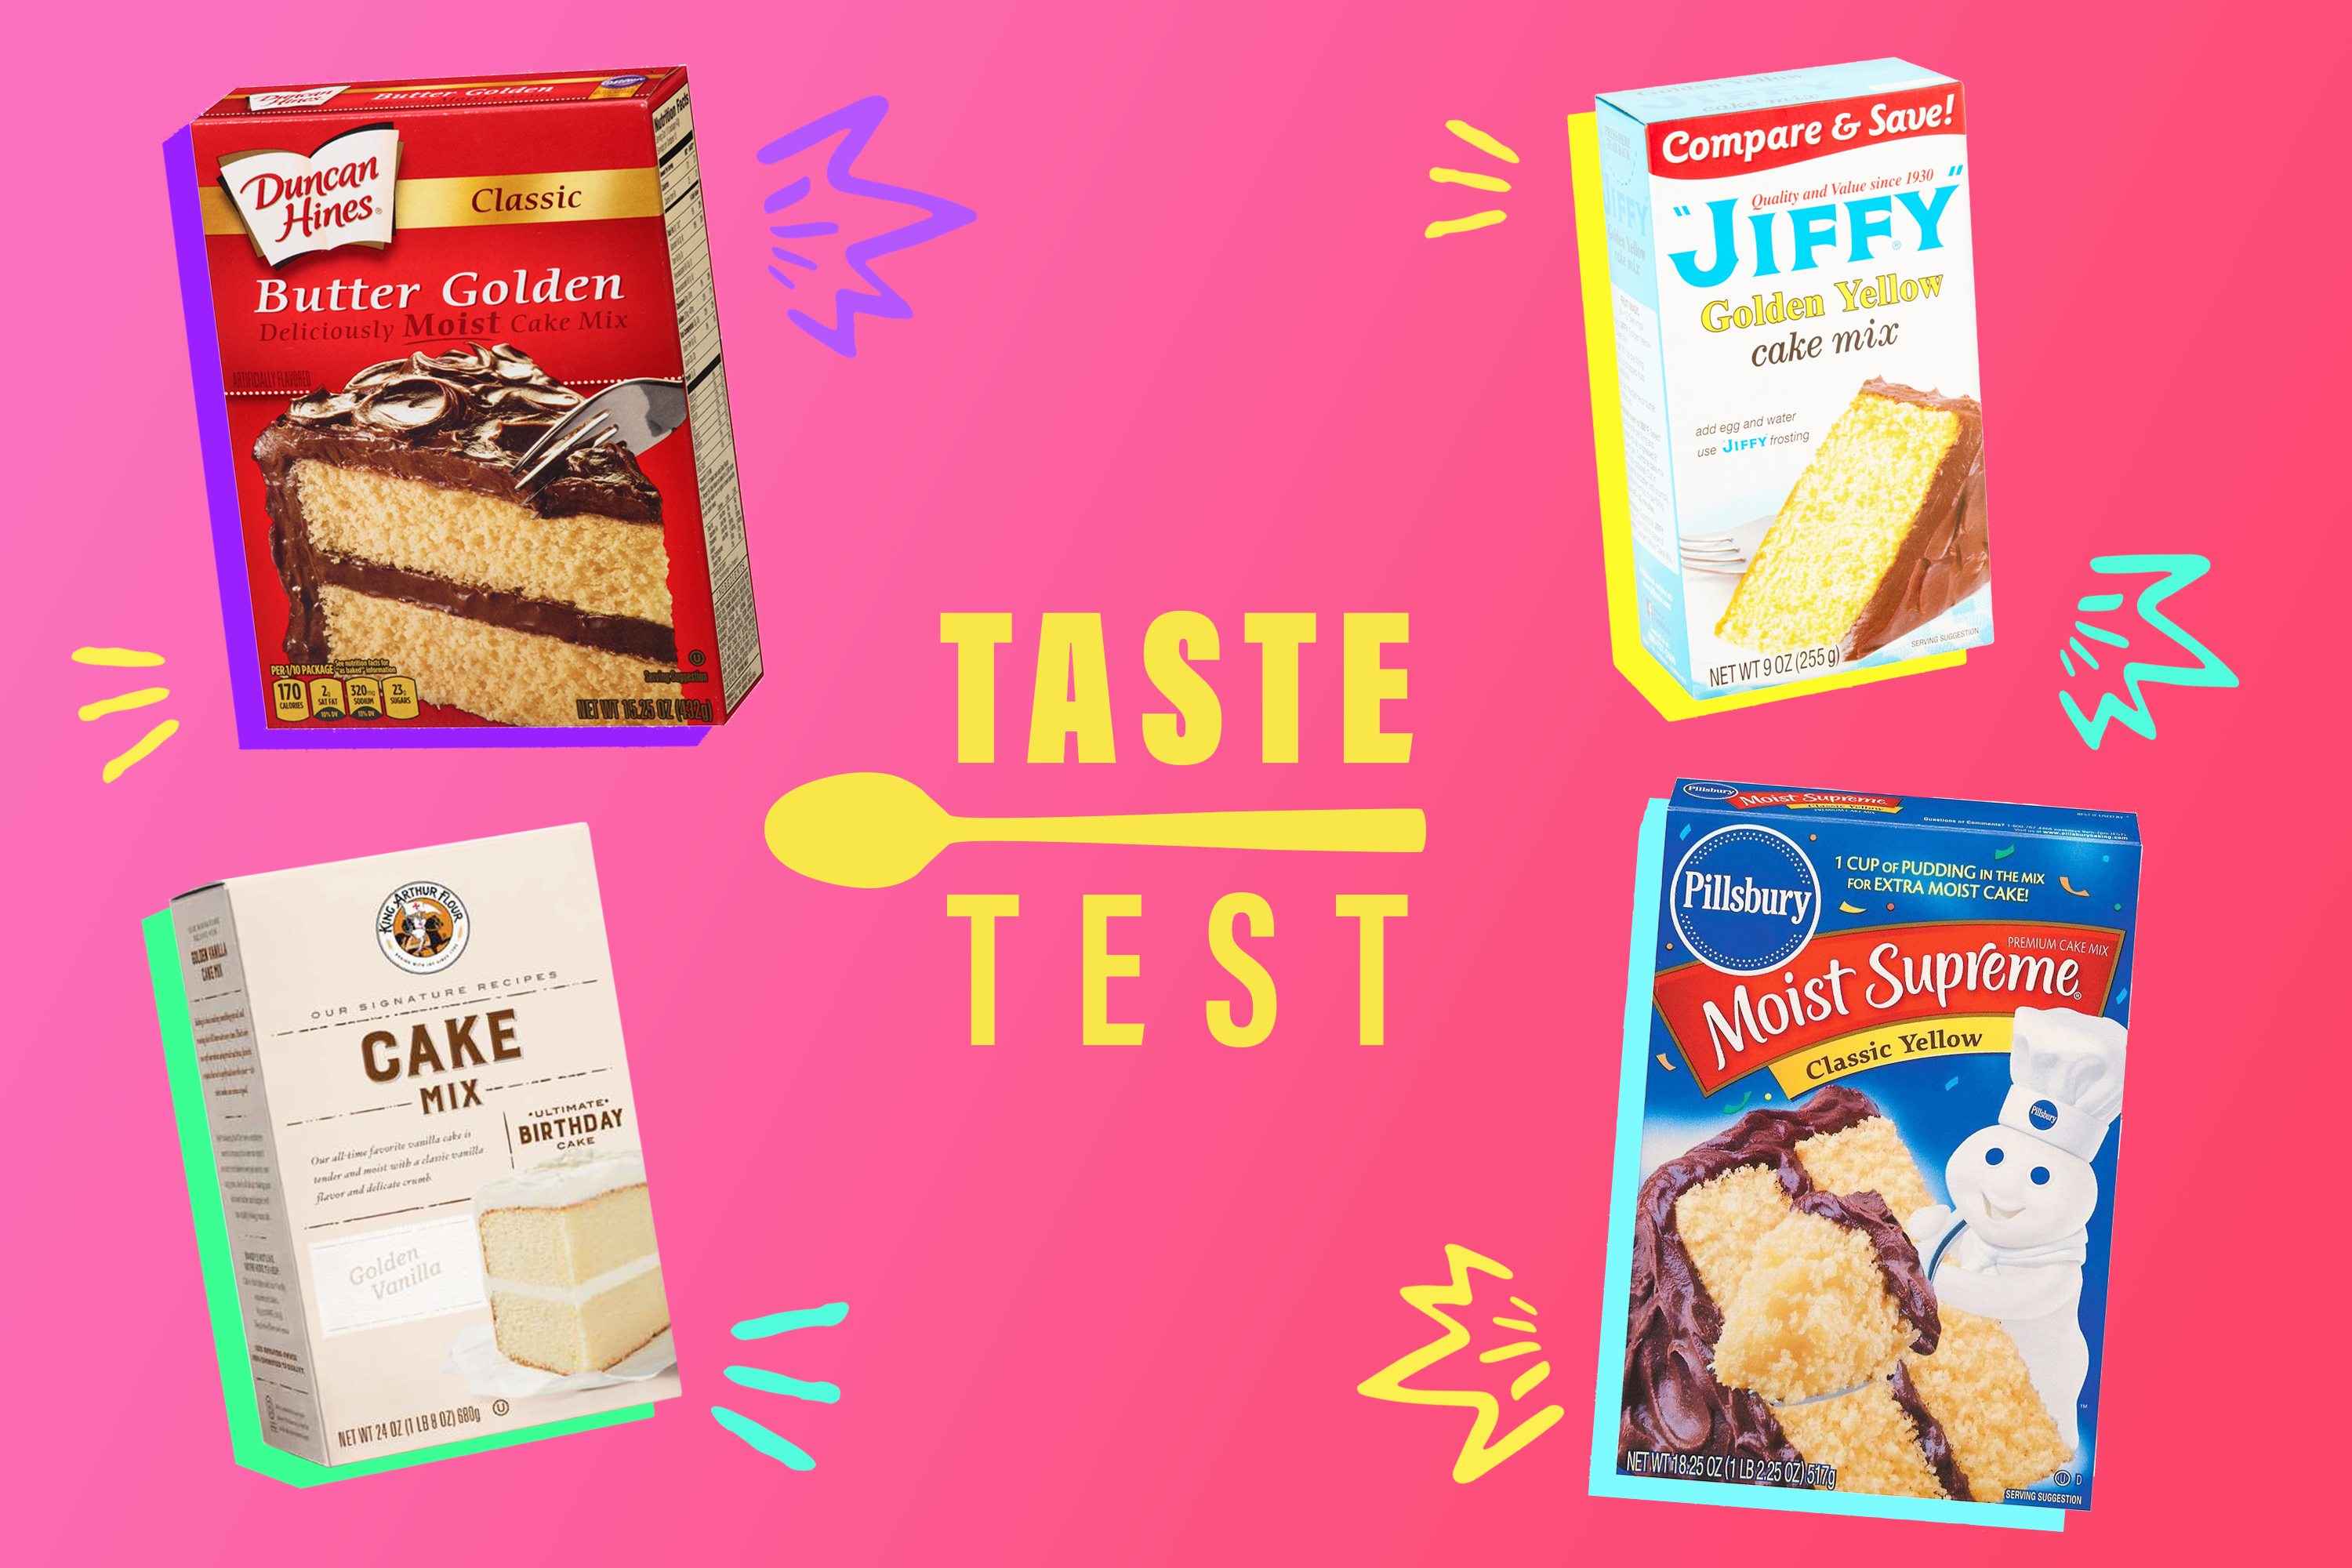 The Best Yellow Cake Mix Brands: We Tried 8 in a Blind Taste Test